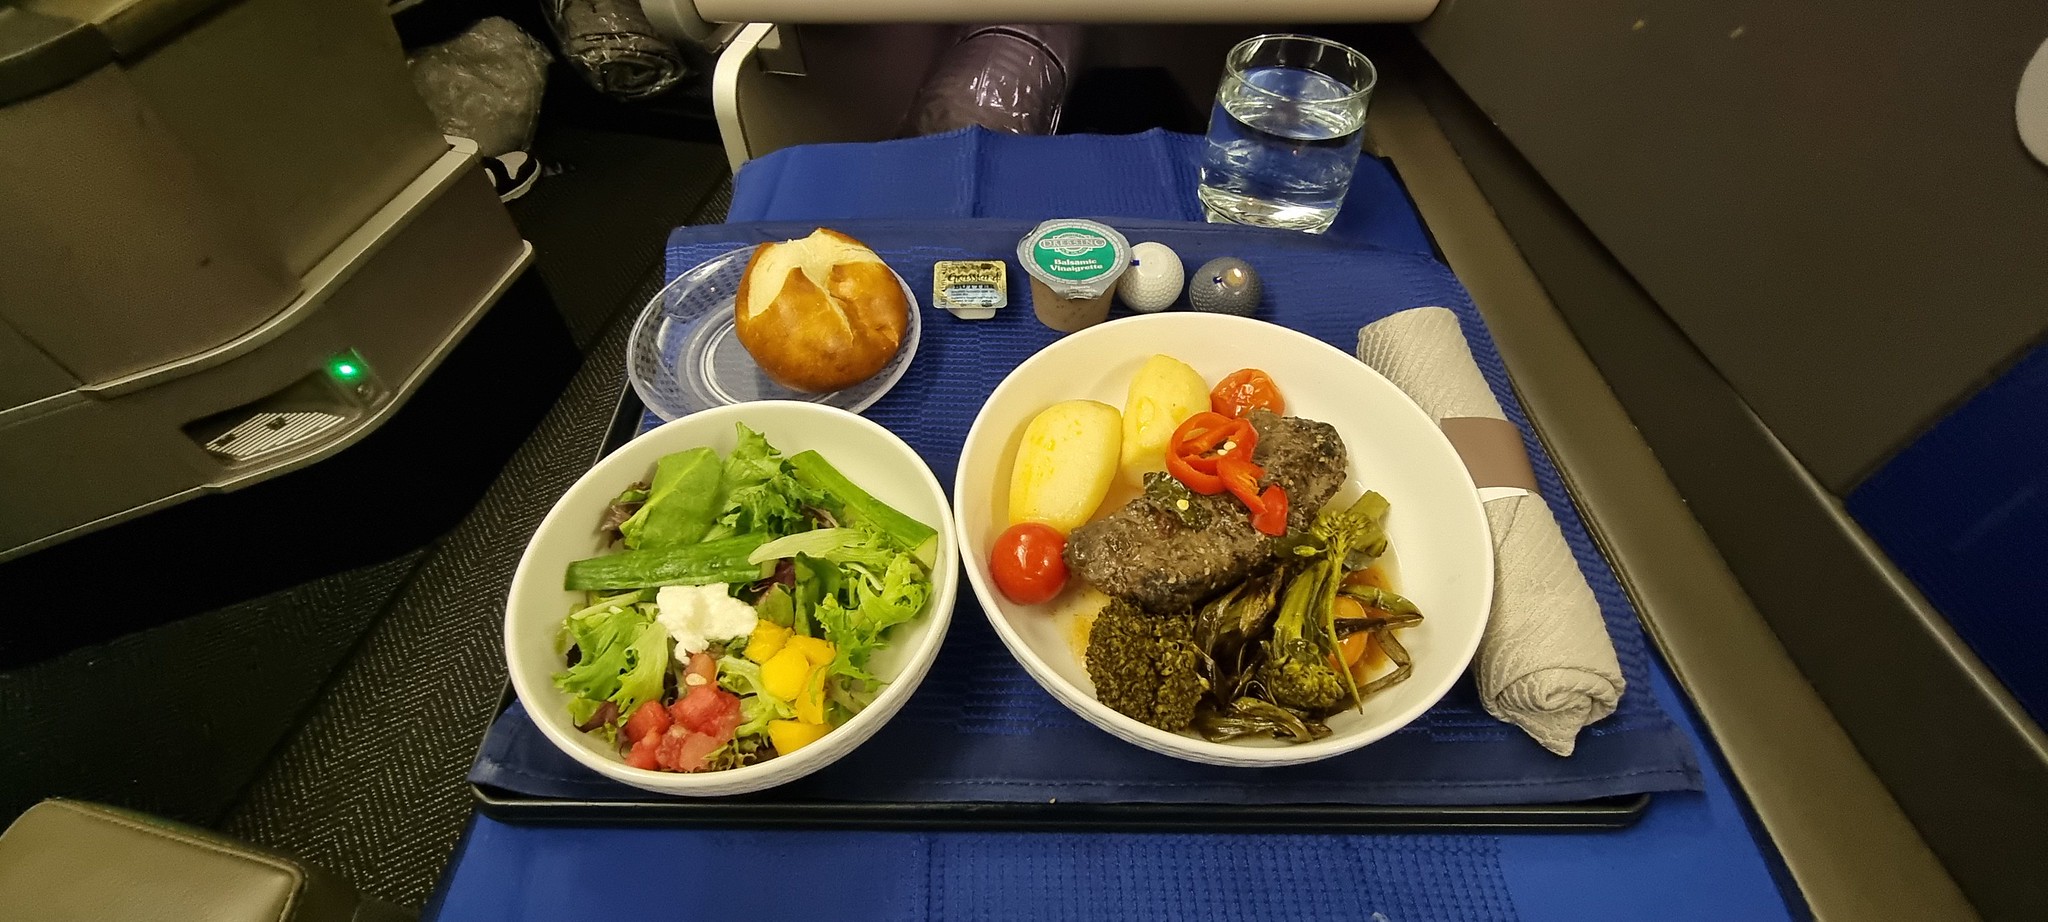 The main meal served on board the UA flight back to Heathrow